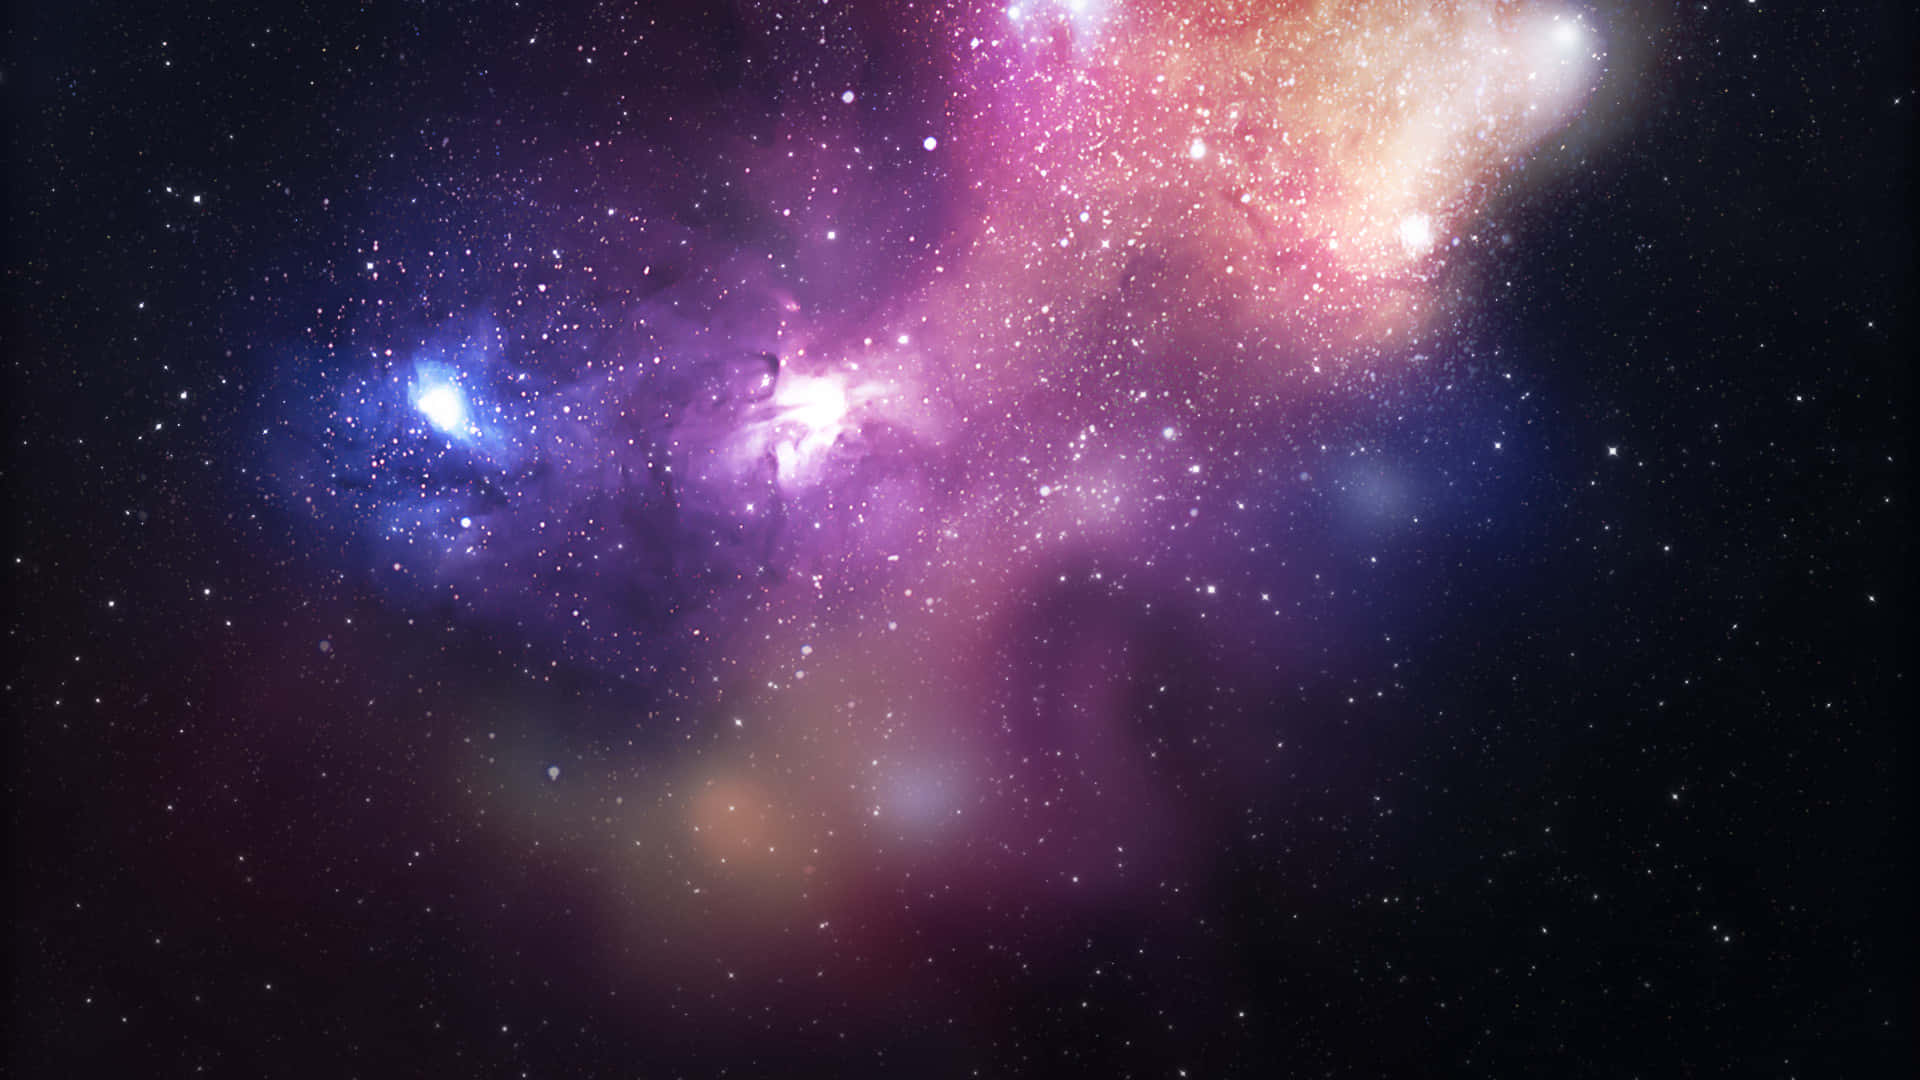 Colorful Cloud In Galaxy Space Background Wallpaper